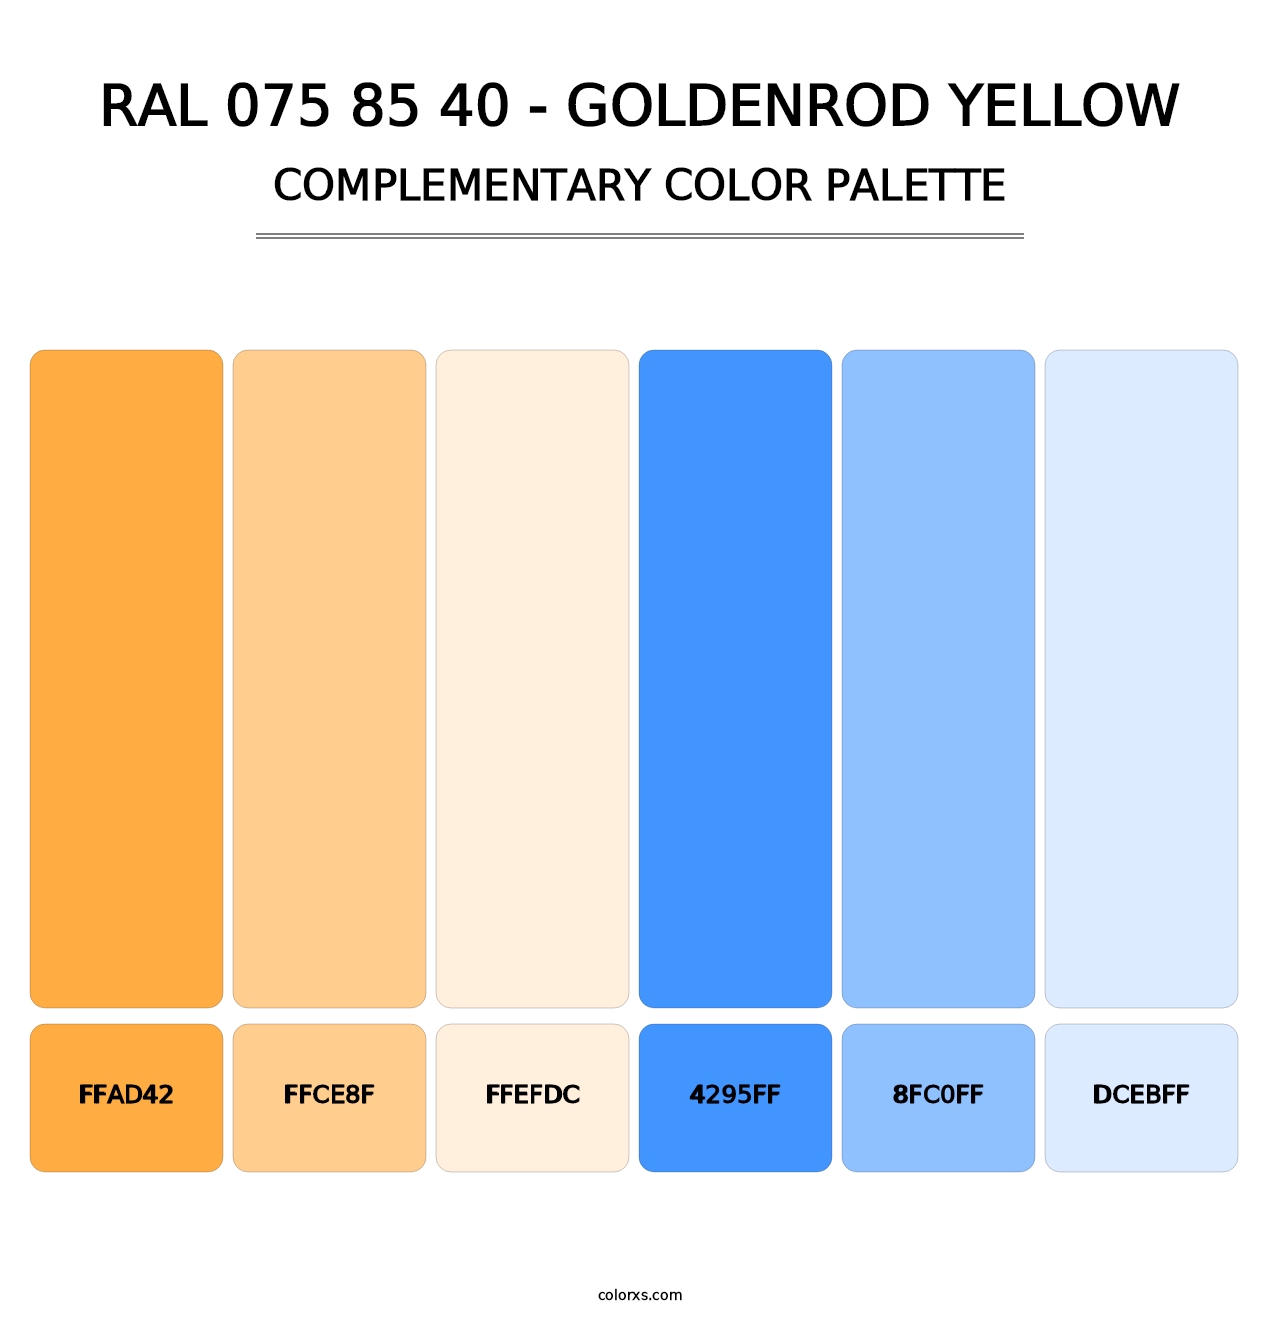 RAL 075 85 40 - Goldenrod Yellow - Complementary Color Palette